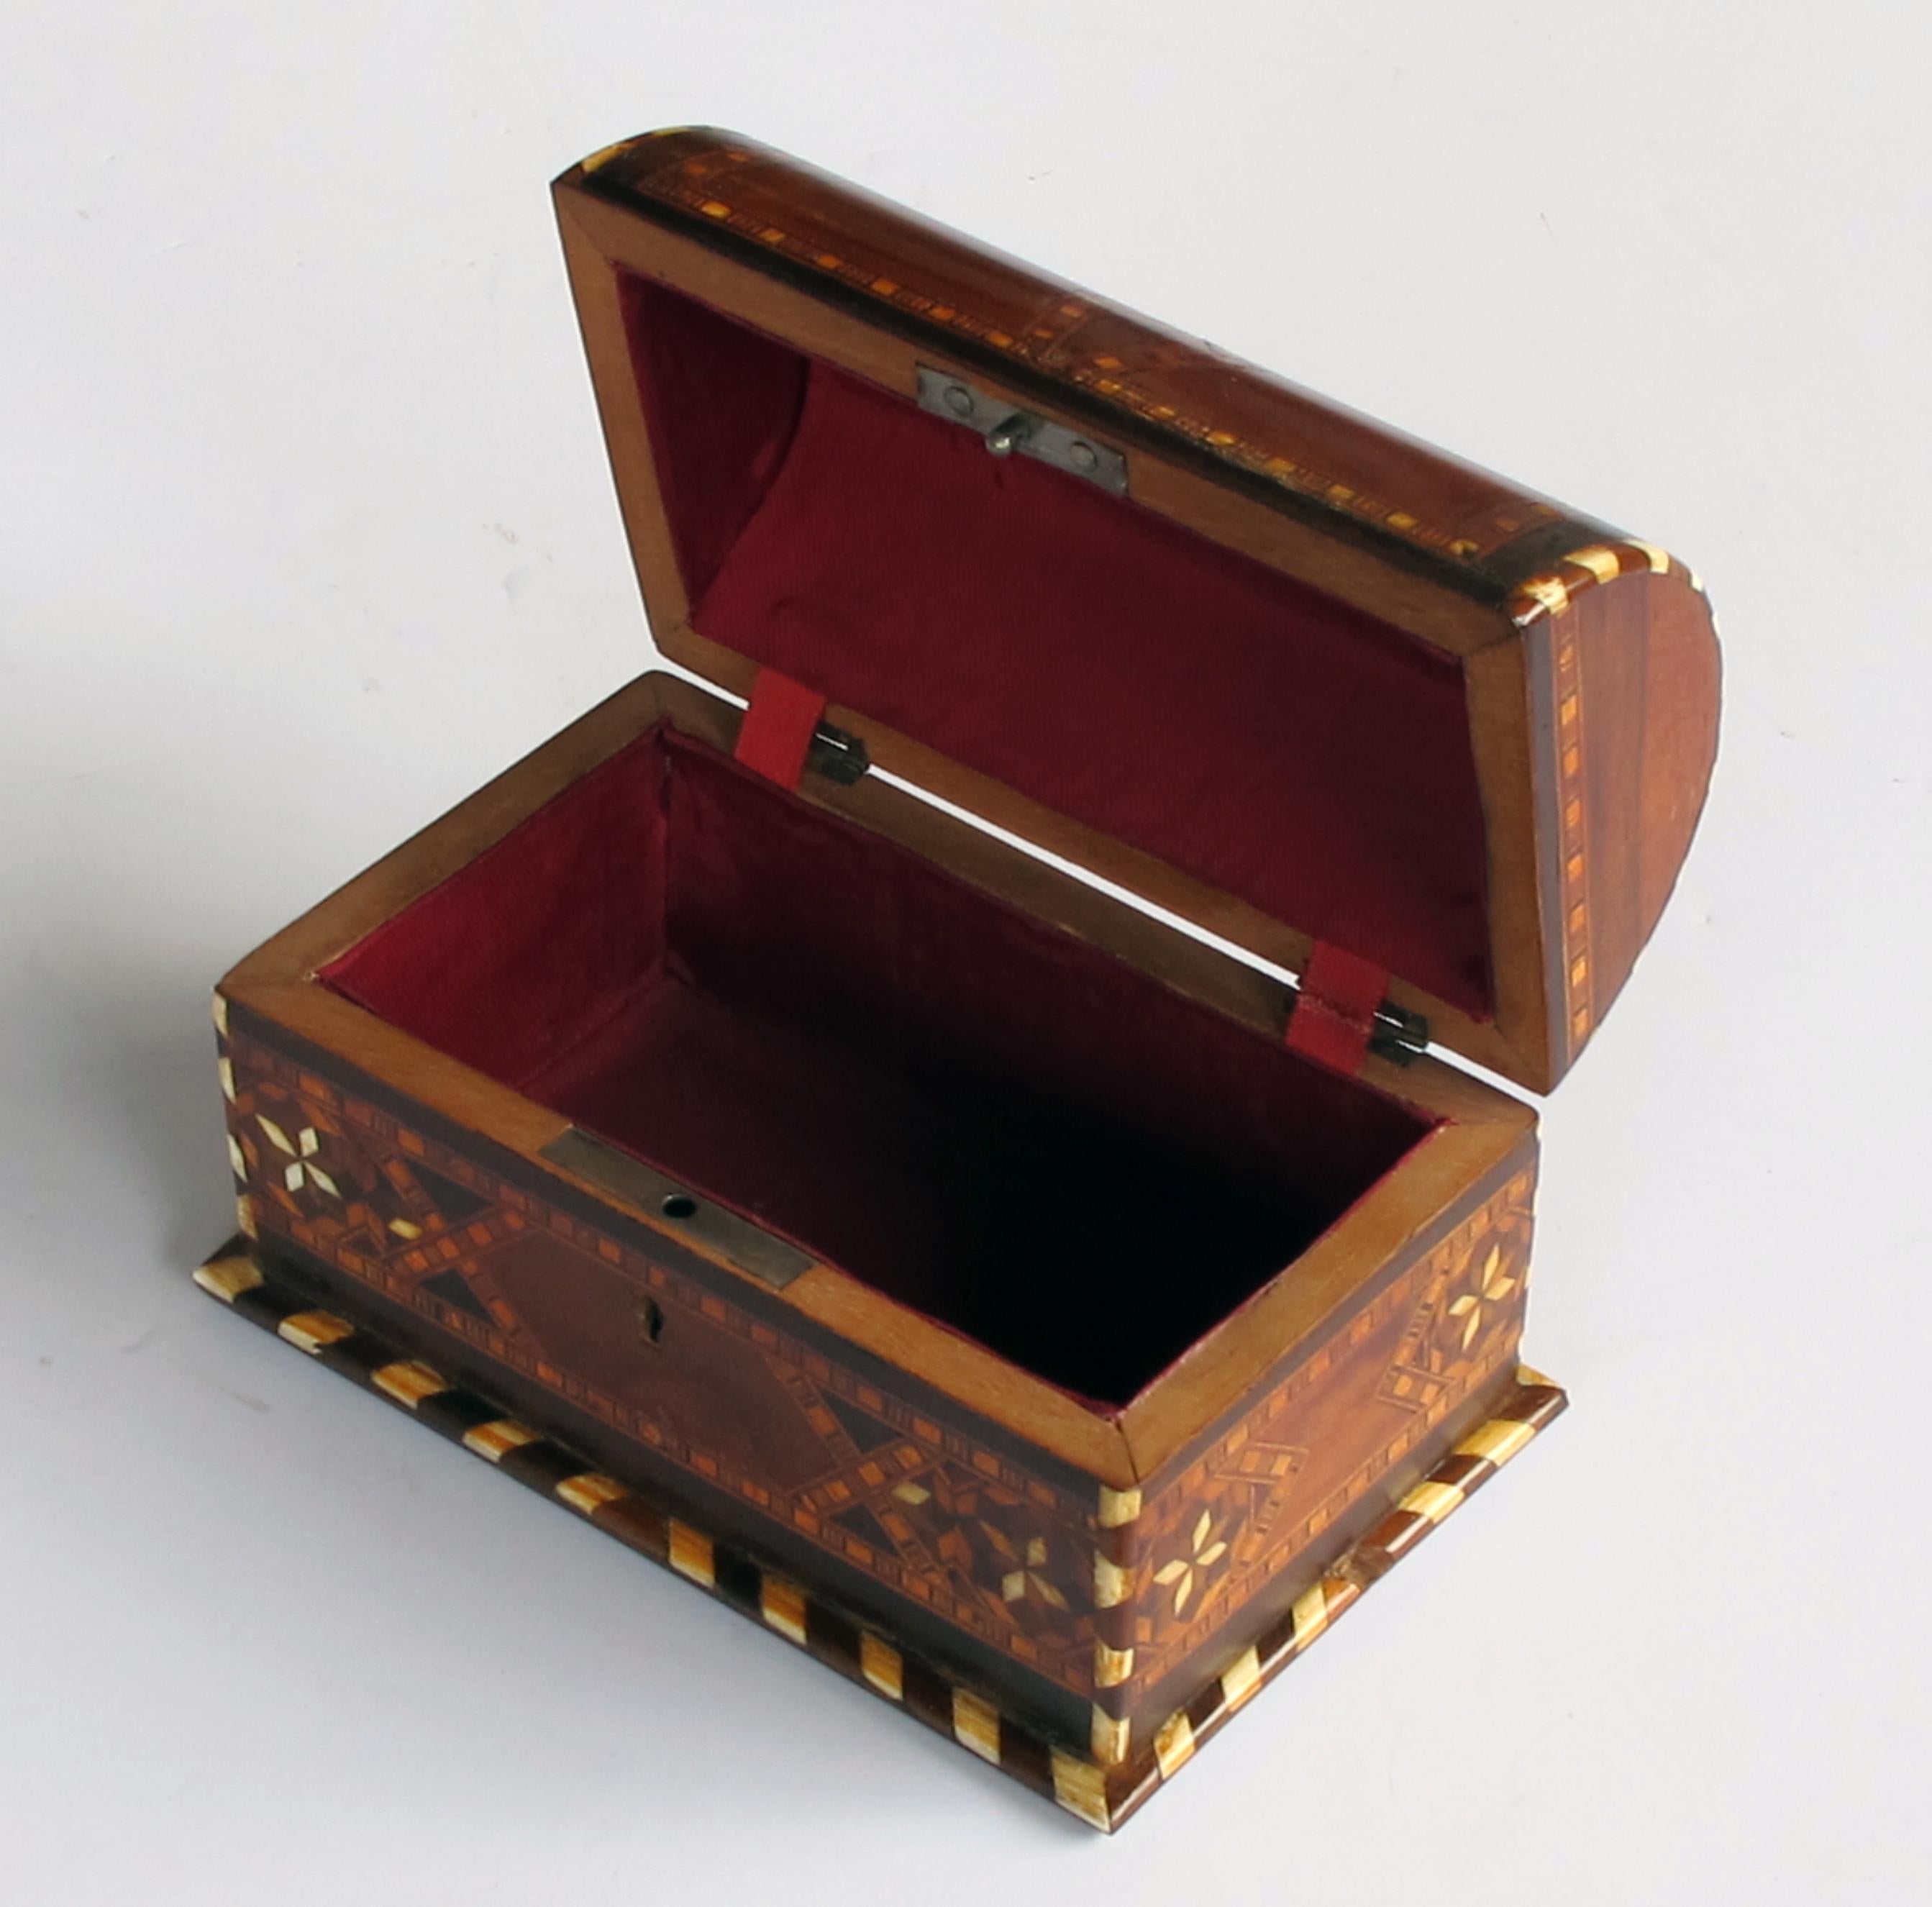 Islamic Well-Crafted and Richly-Patinated Syrian Inlaid Trinket Box with Domed Lid